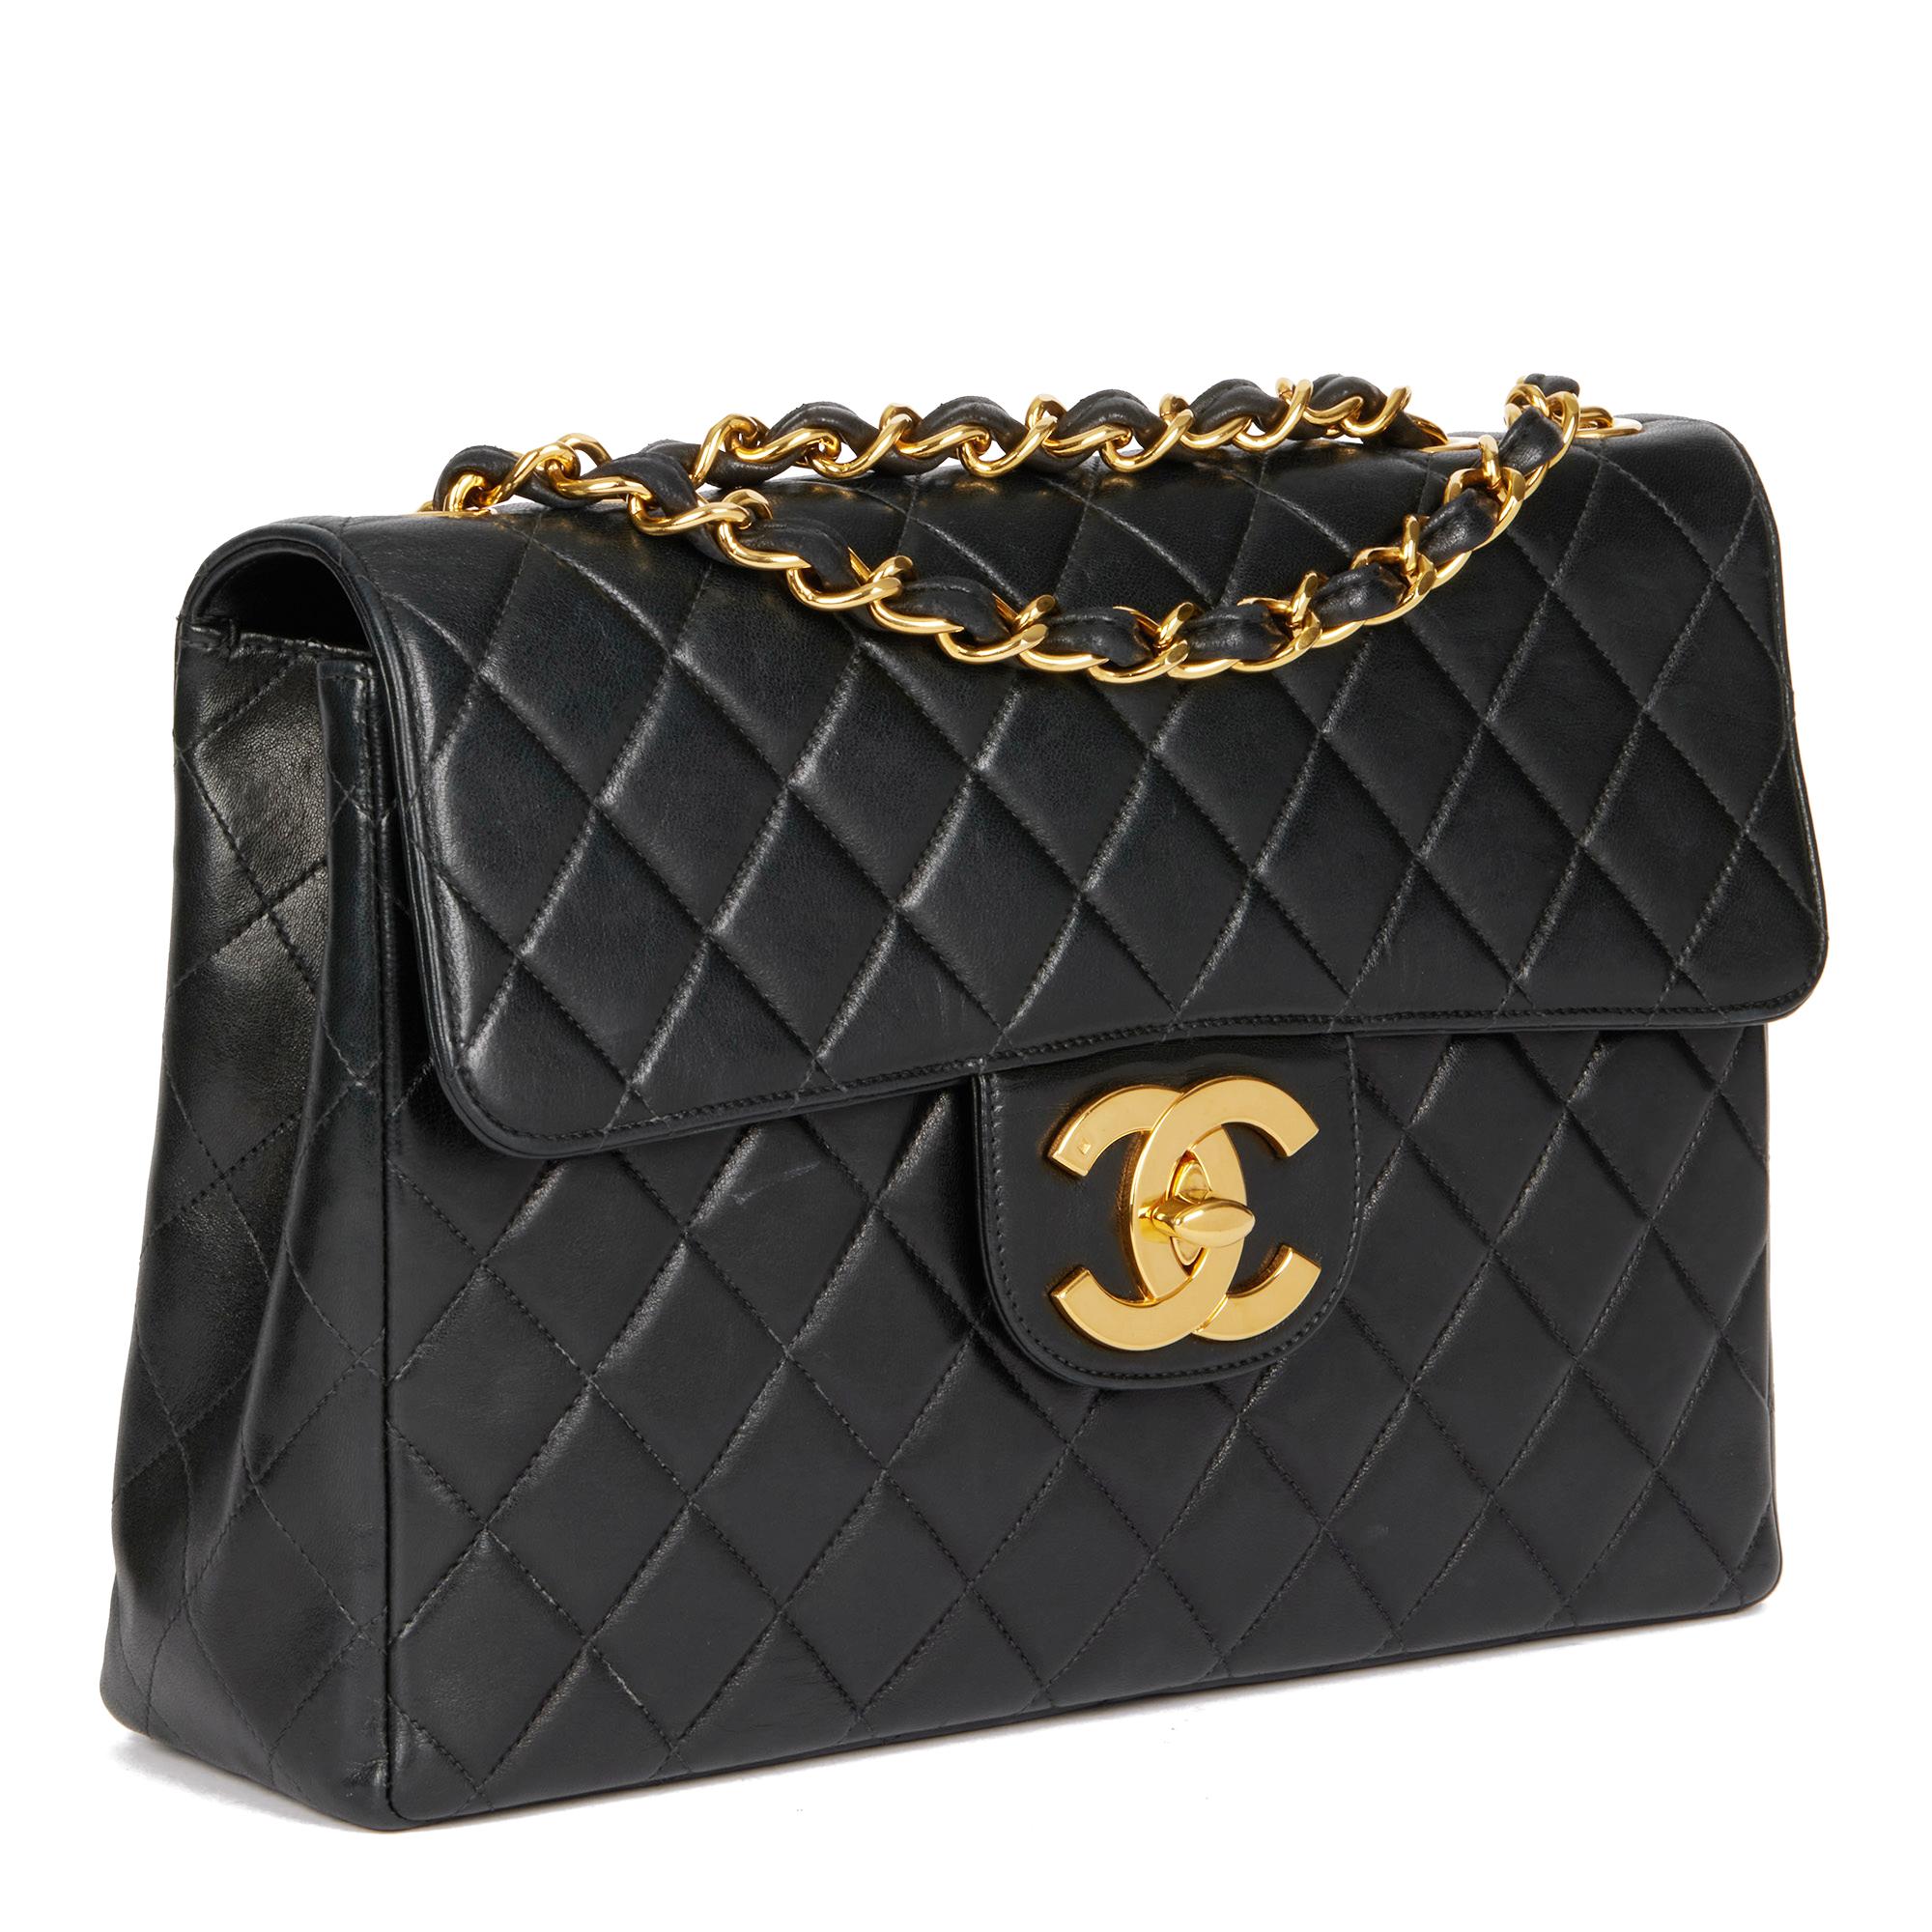 CHANEL
Black Quilted Lambskin Vintage Jumbo XL Classic Single Flap Bag

Xupes Reference: HB4692
Serial Number: 4380407
Age (Circa): 1996
Accompanied By: Chanel Dust Bag, Care Booklet, Authenticity Card
Authenticity Details: Authenticity Card, Serial